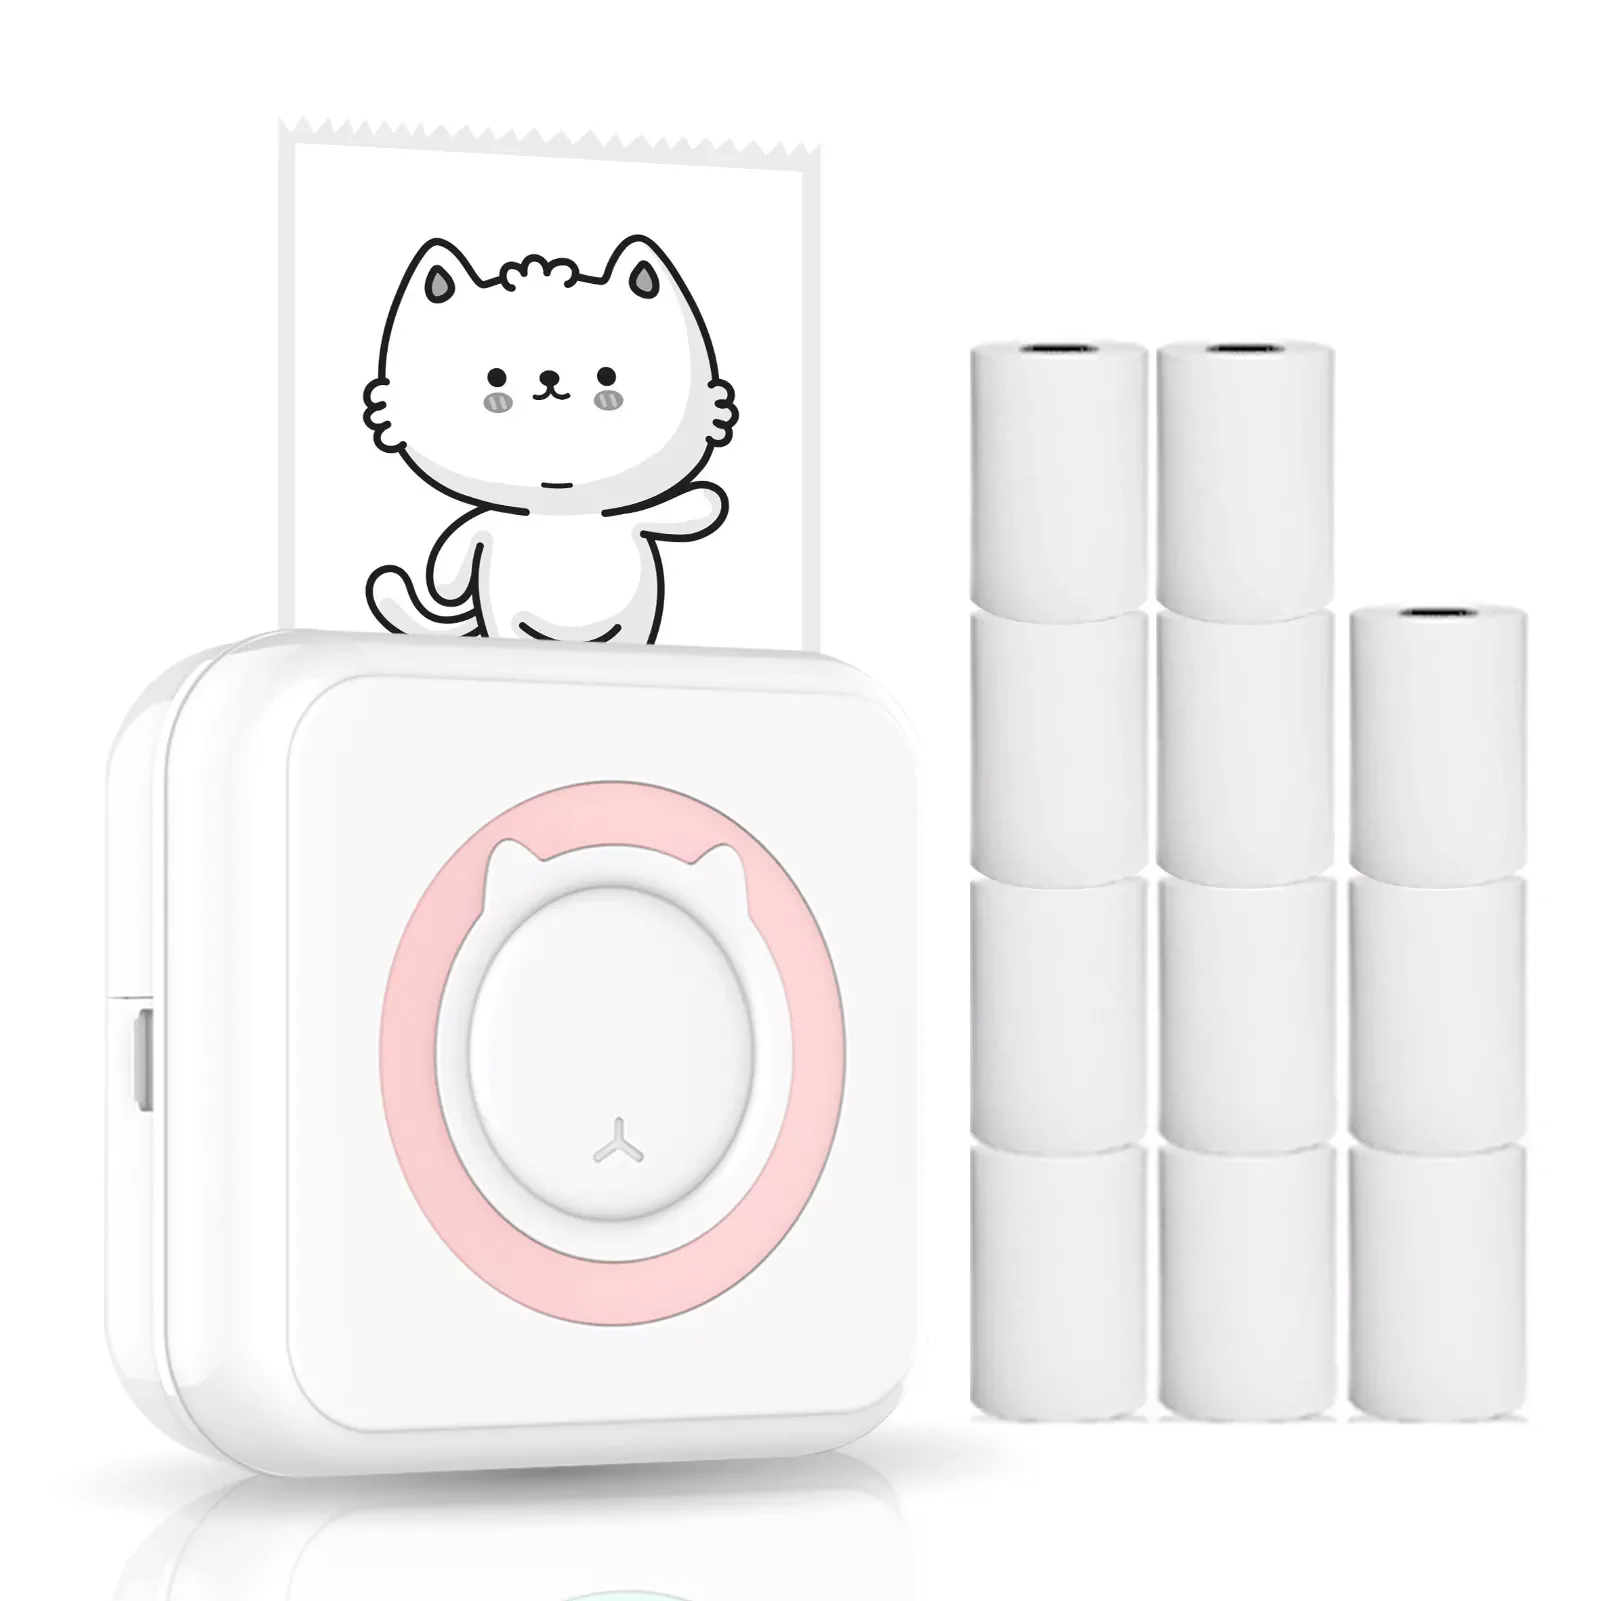 

All-in-one Photo Printer Multifunction Portable Printer Wireless Instant Mini Printer Support BT Connection for Smartphone 57mm